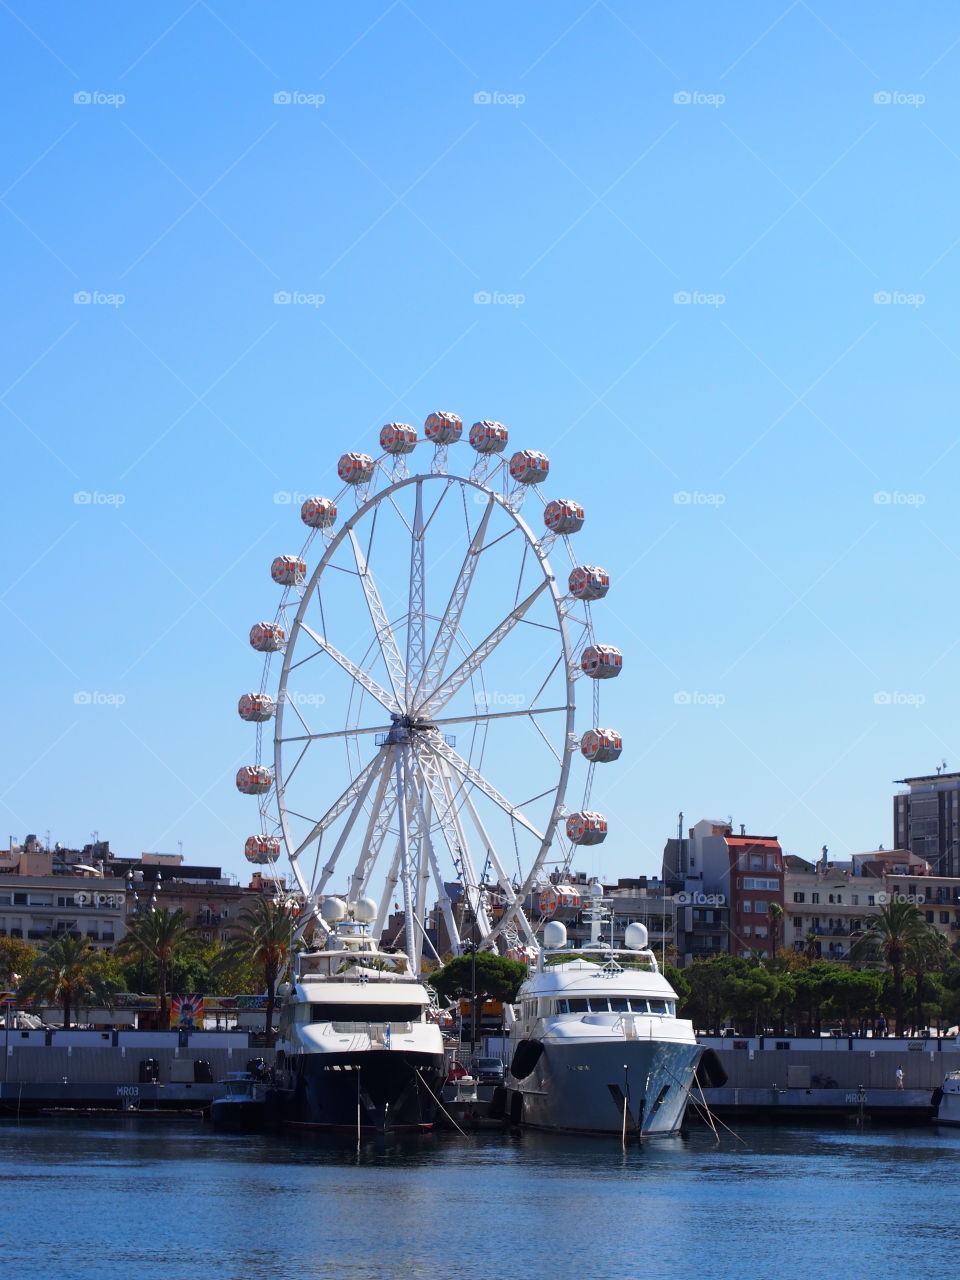 Attraction and boats in the port of barcelona